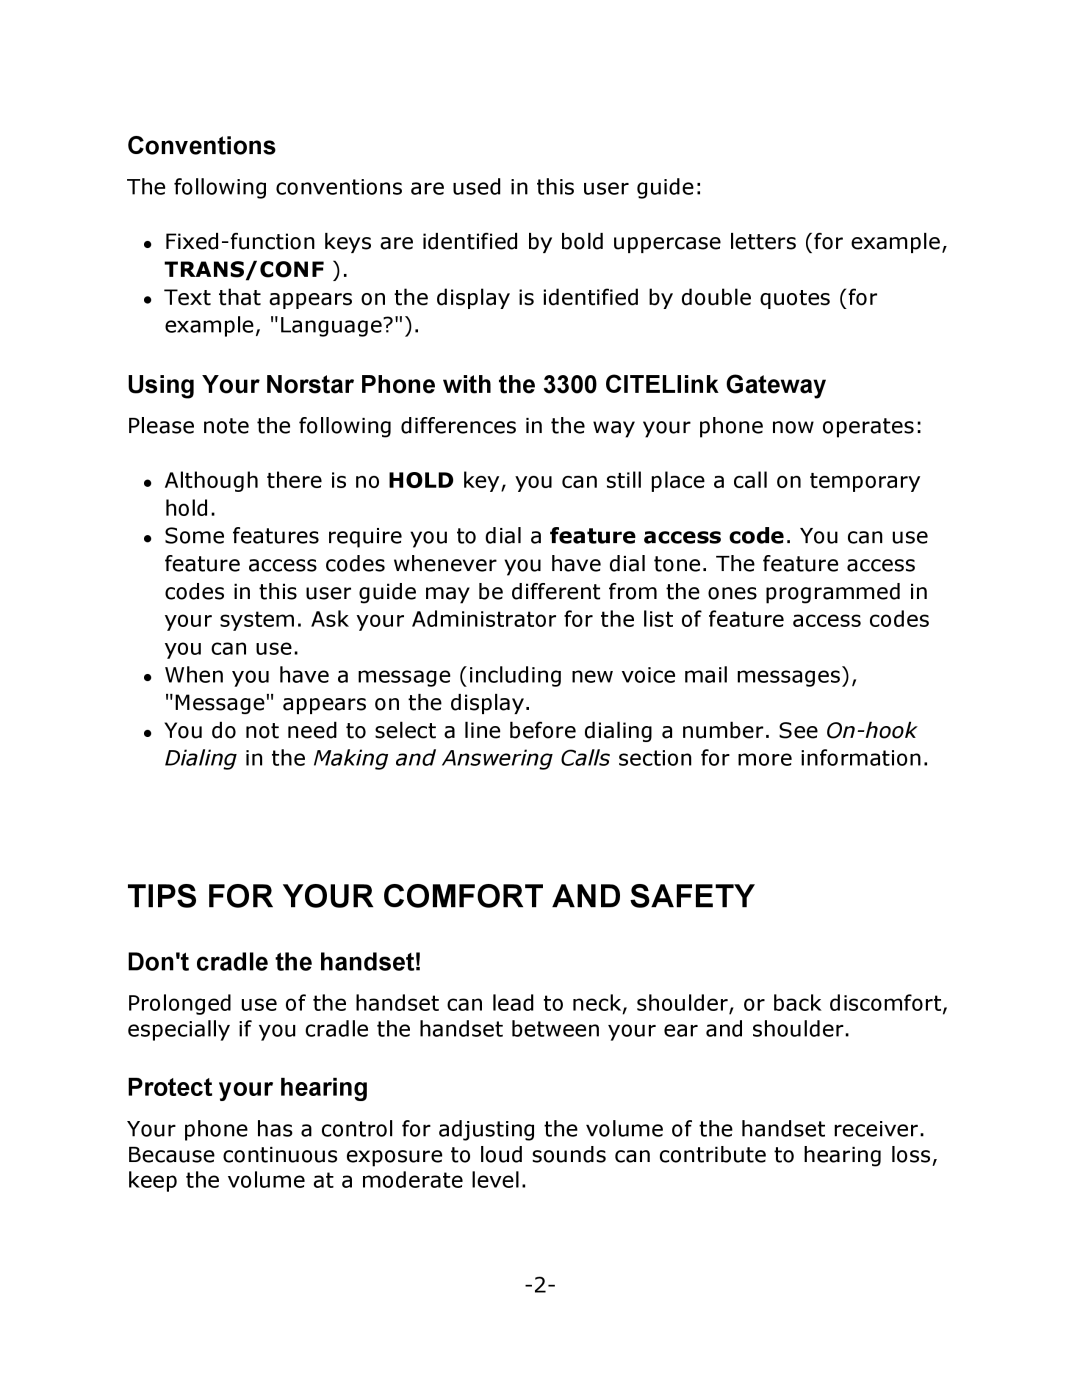 Mitel M7100 manual Tips For Your Comfort And Safety, Conventions, Using Your Norstar Phone with the 3300 CITELlink Gateway 